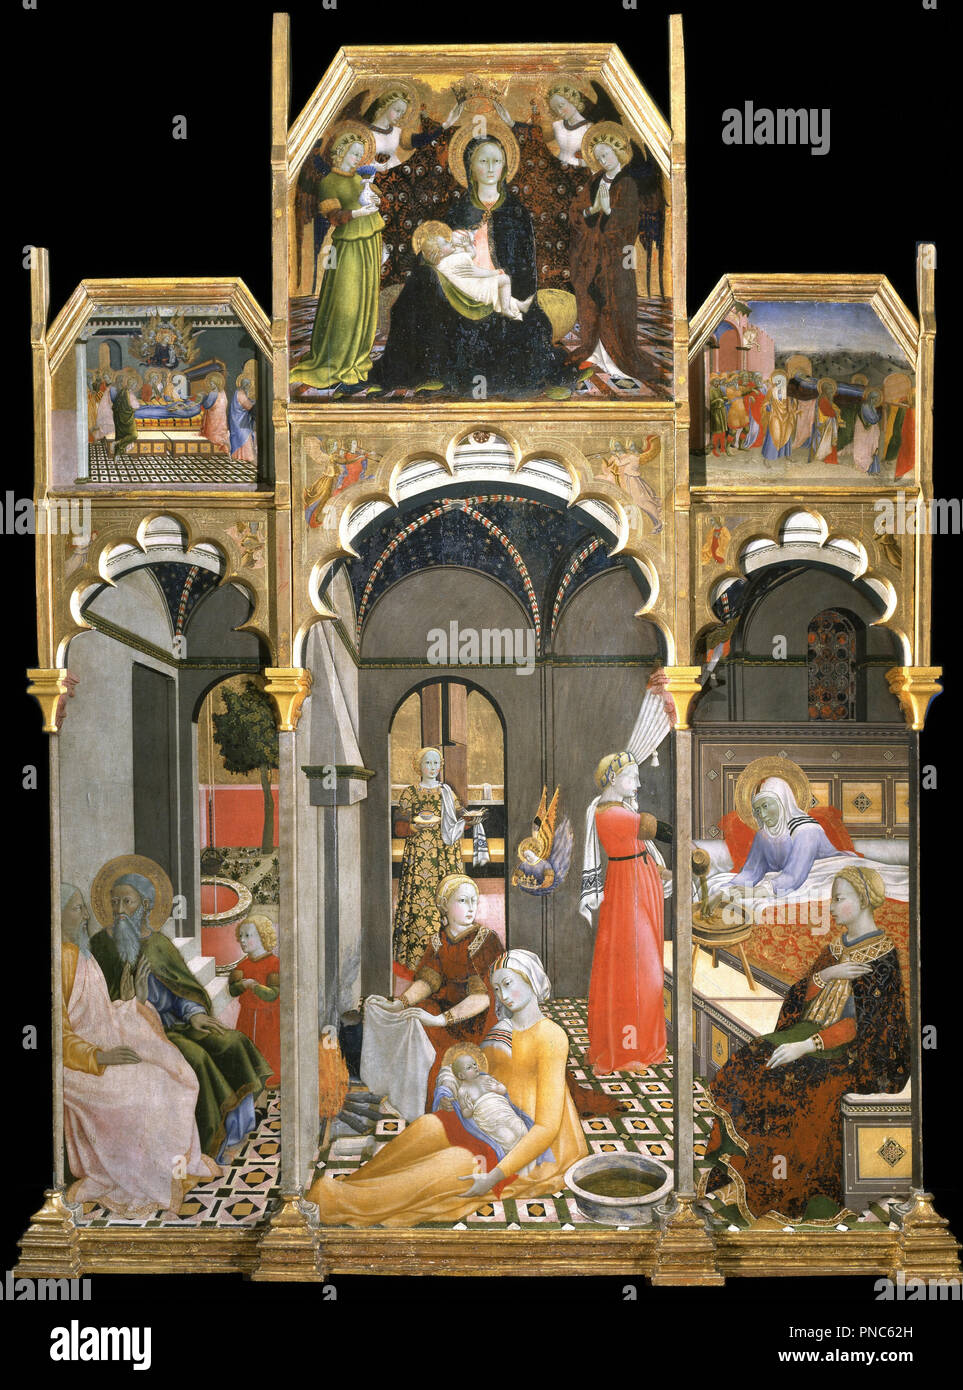 Birth of the Virgin; Stories of the life of the Virgin. Date/Period: 1437 - 1439. Tempera on Panel. Height: 222 mm (8.74 in); Width: 172.50 mm (6.79 in). Author: SANO DI PIETRO. Stock Photo